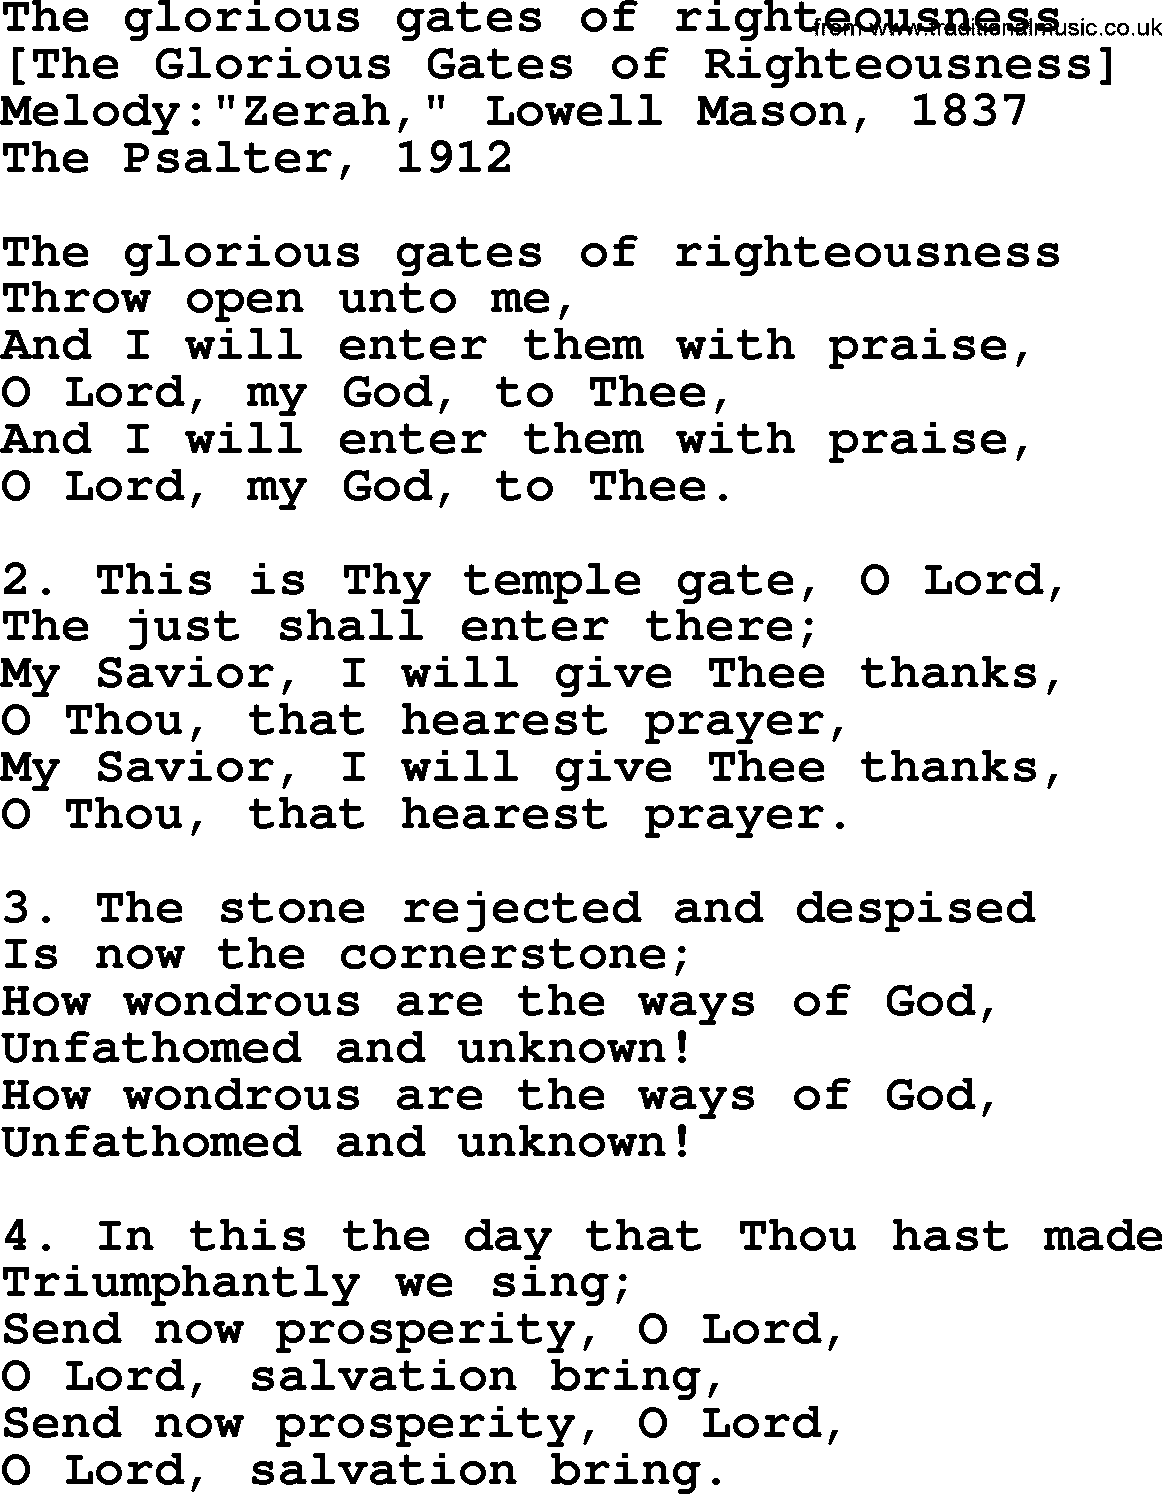 Old American Song: The Glorious Gates Of Righteousness, lyrics